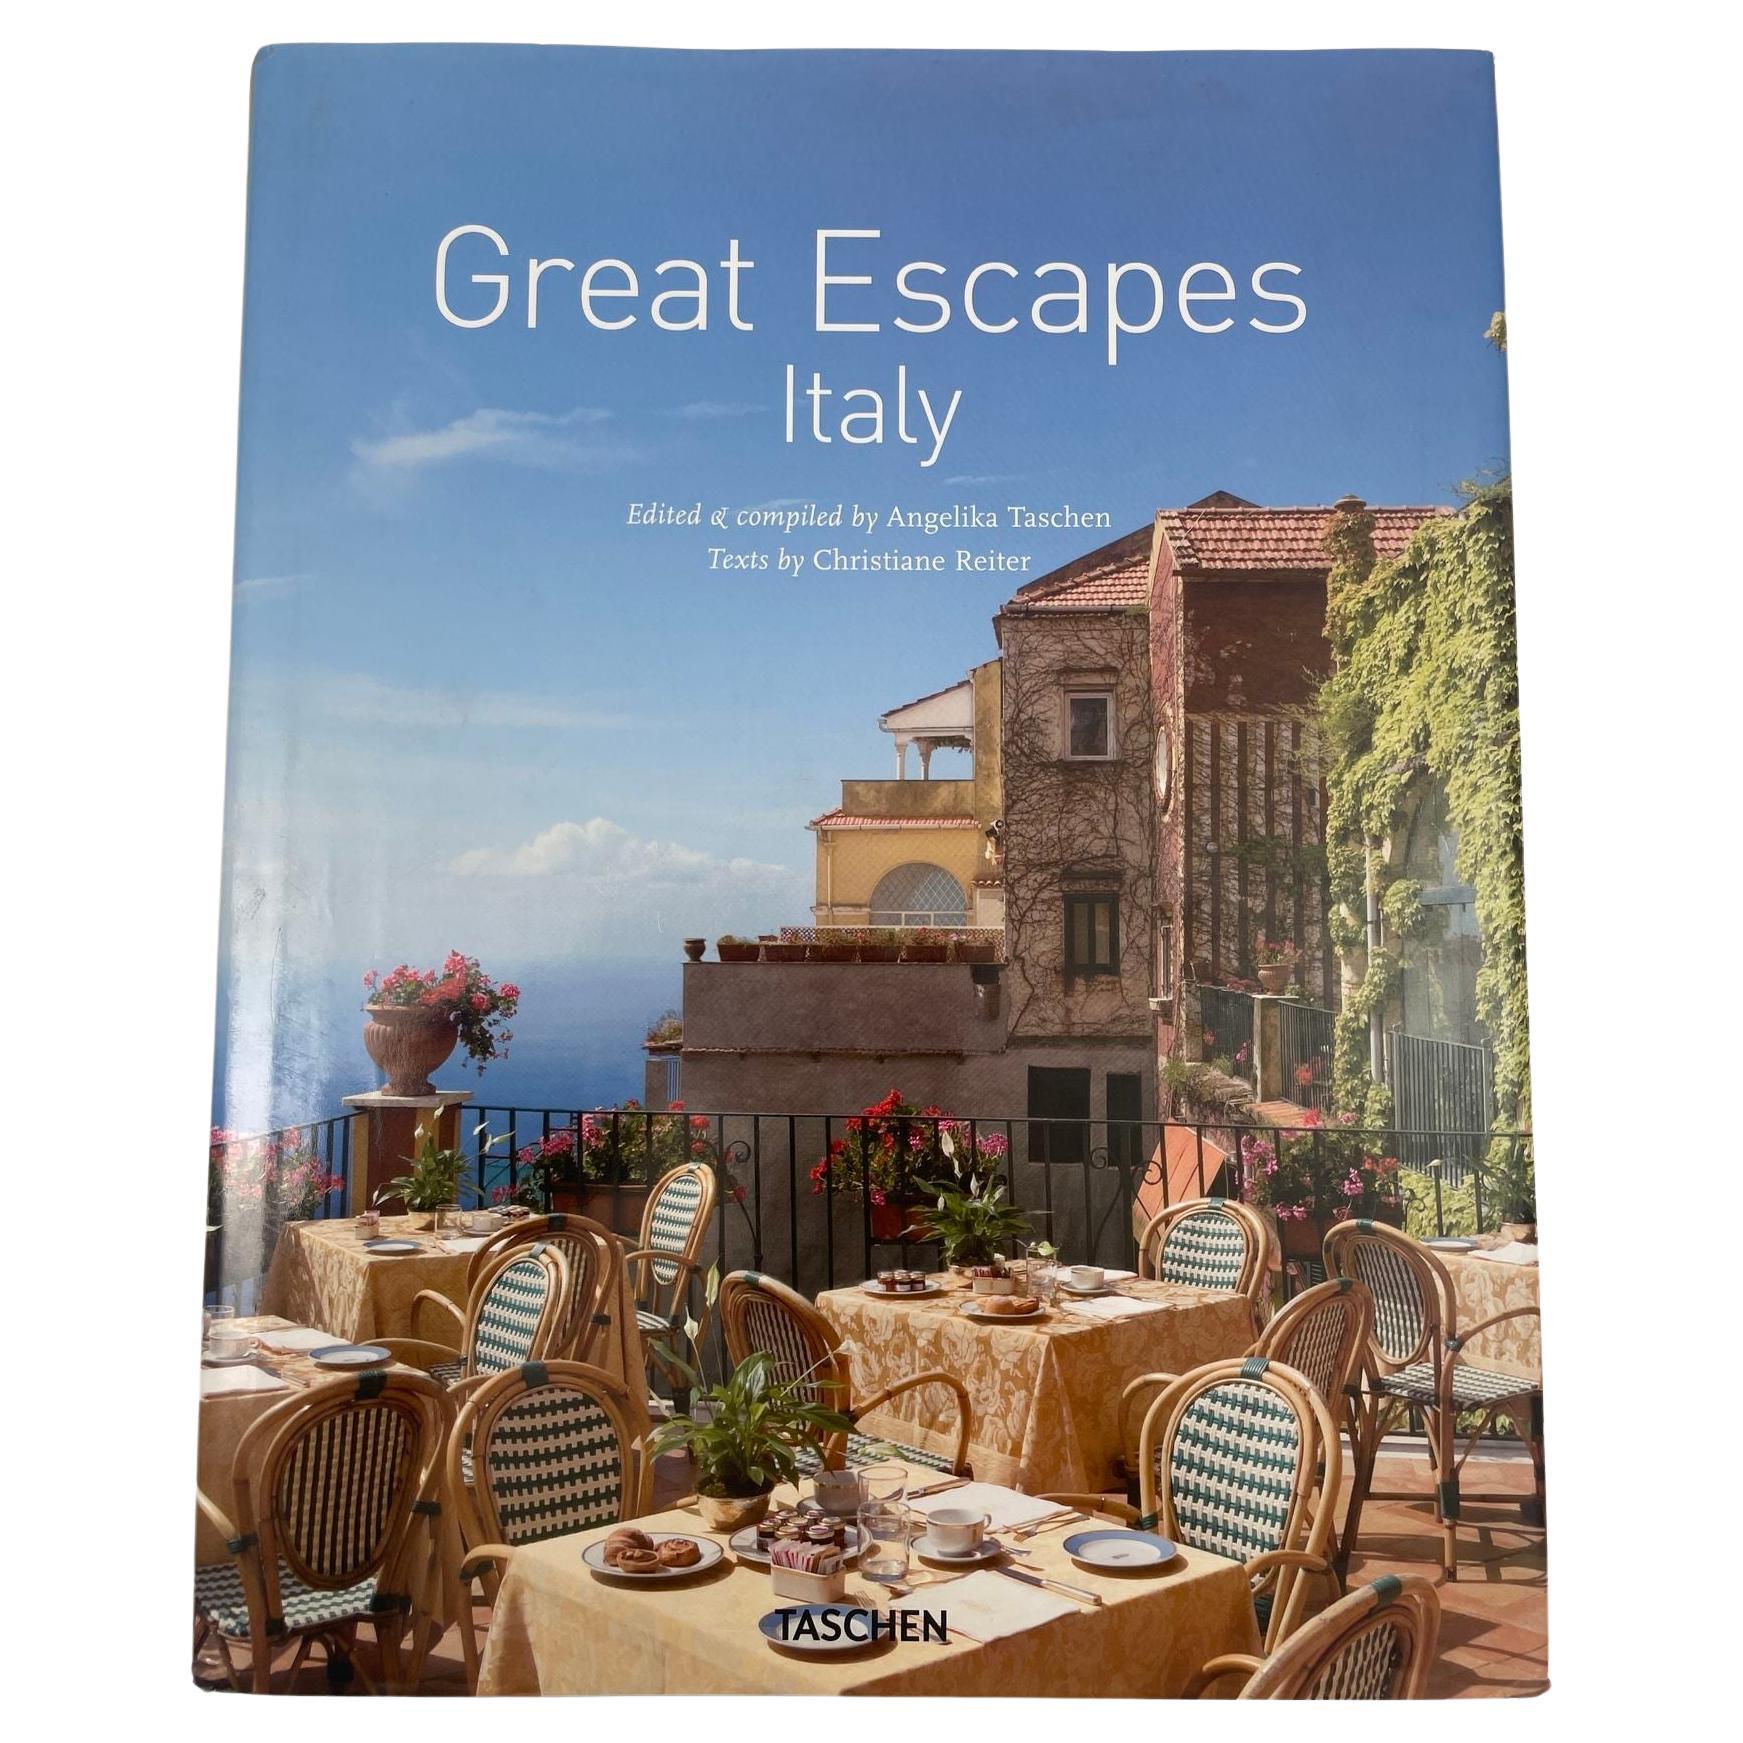 Great Escapes: Italy Angelika Taschen and Christiane Reiter Hardcover Book For Sale